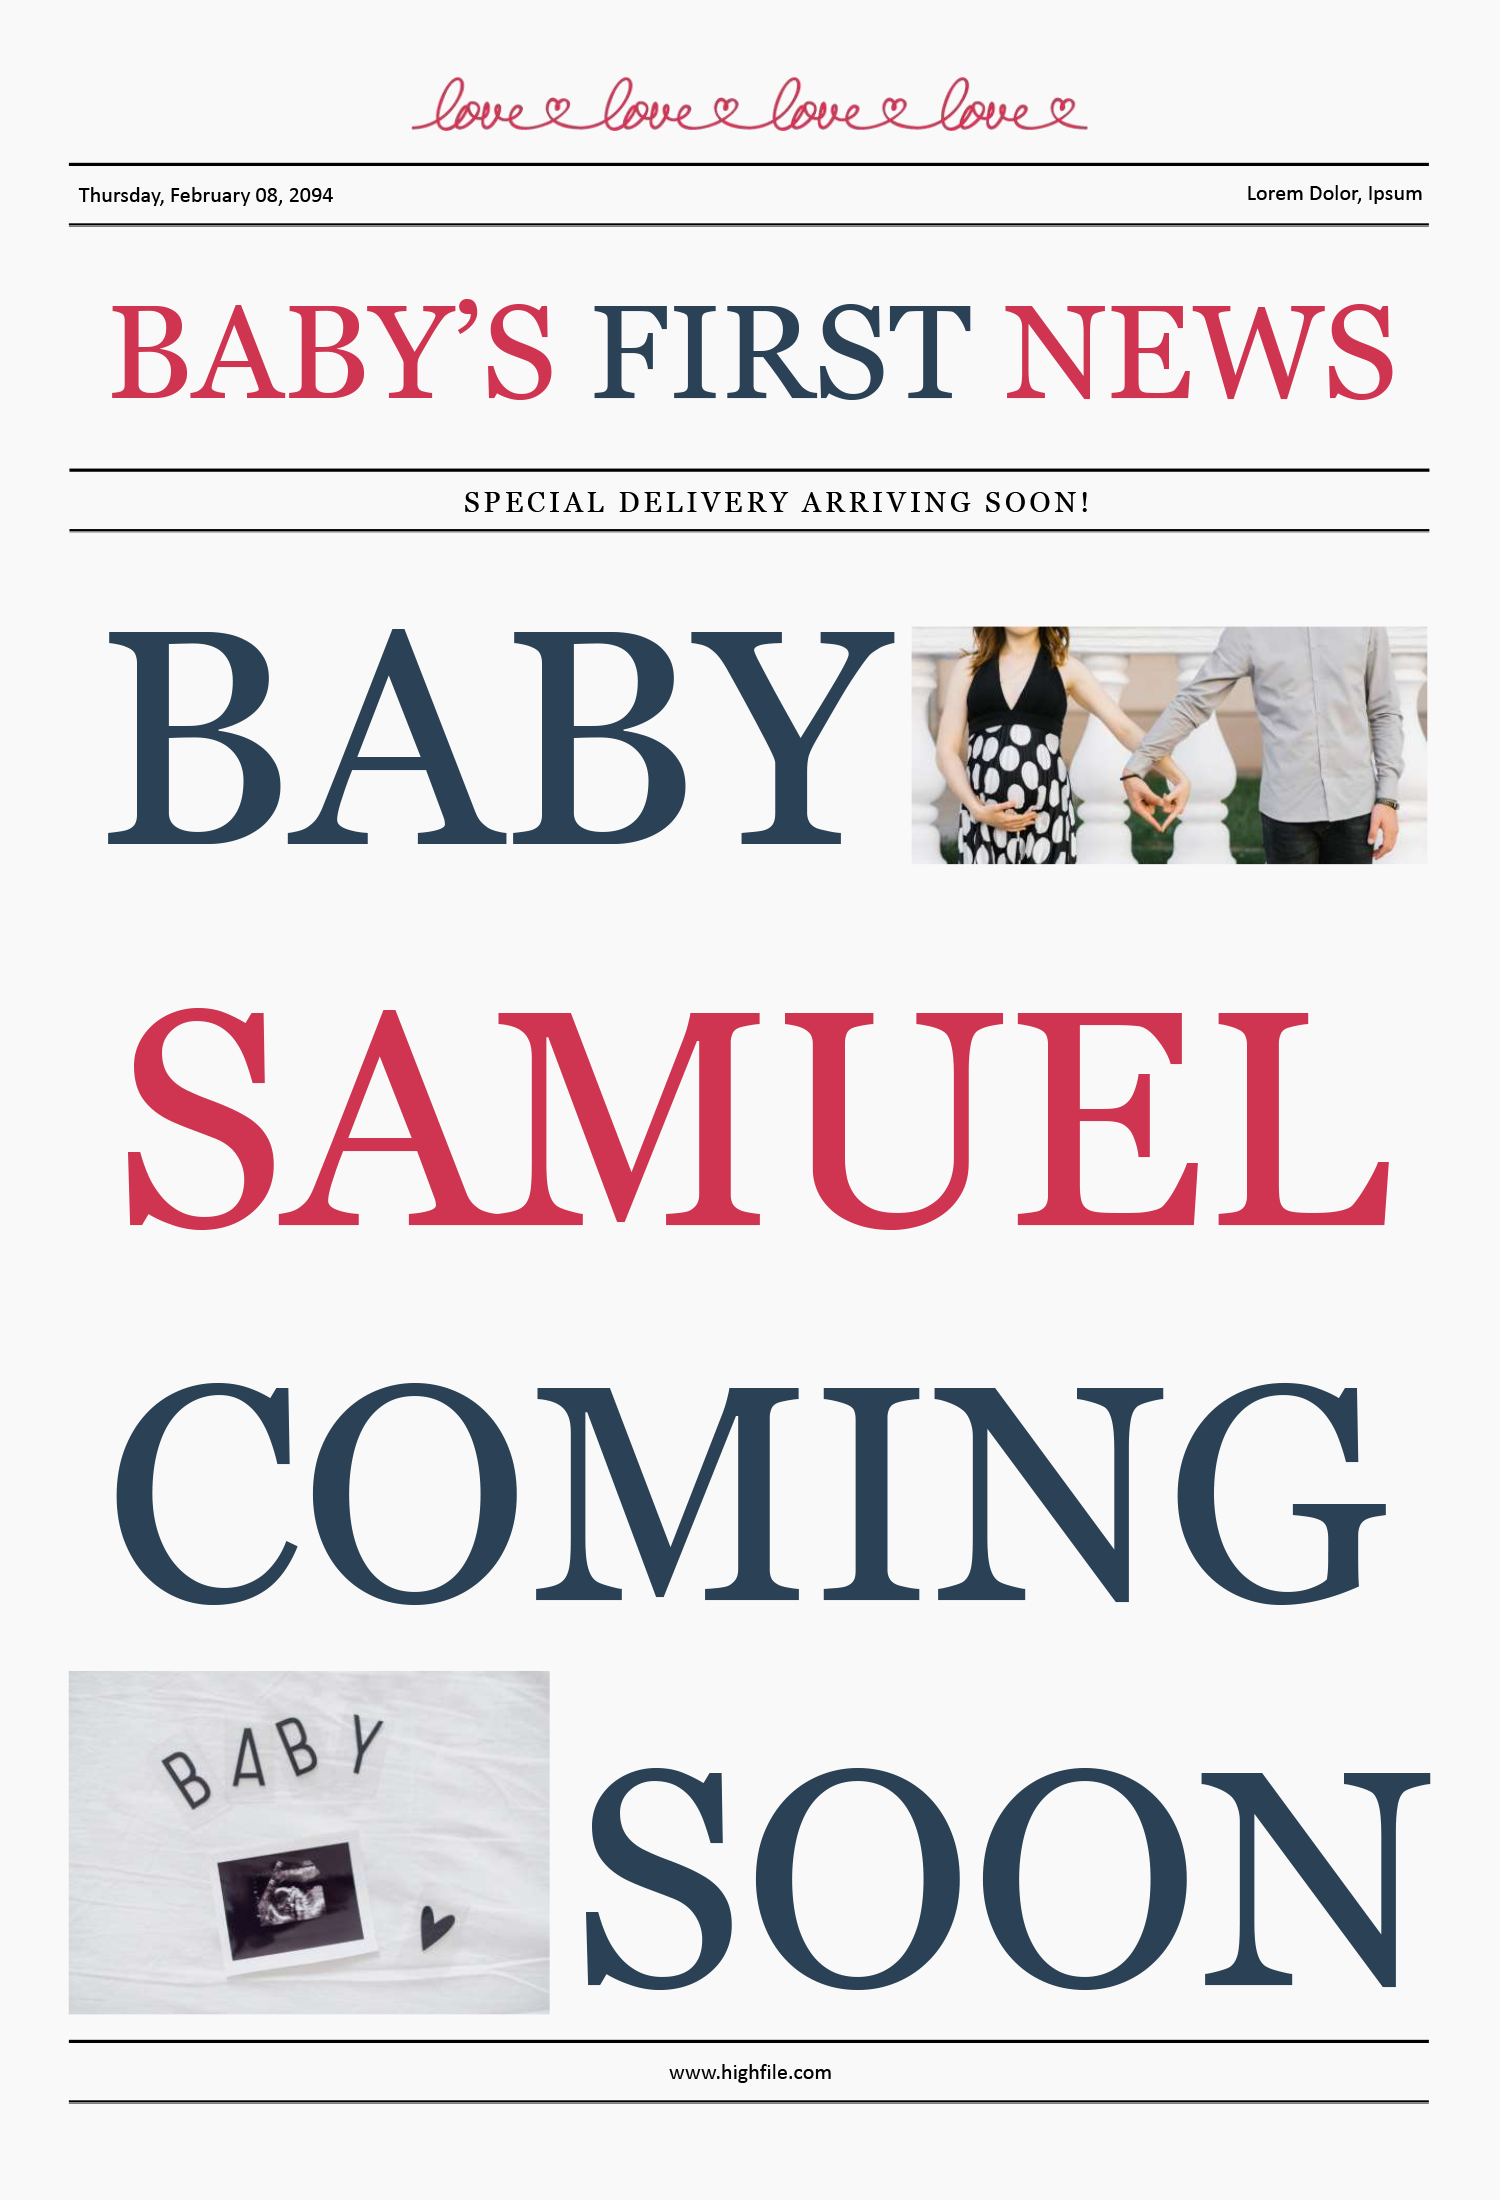 Broadsheet Pregnancy Announcement Newspaper - Front Page